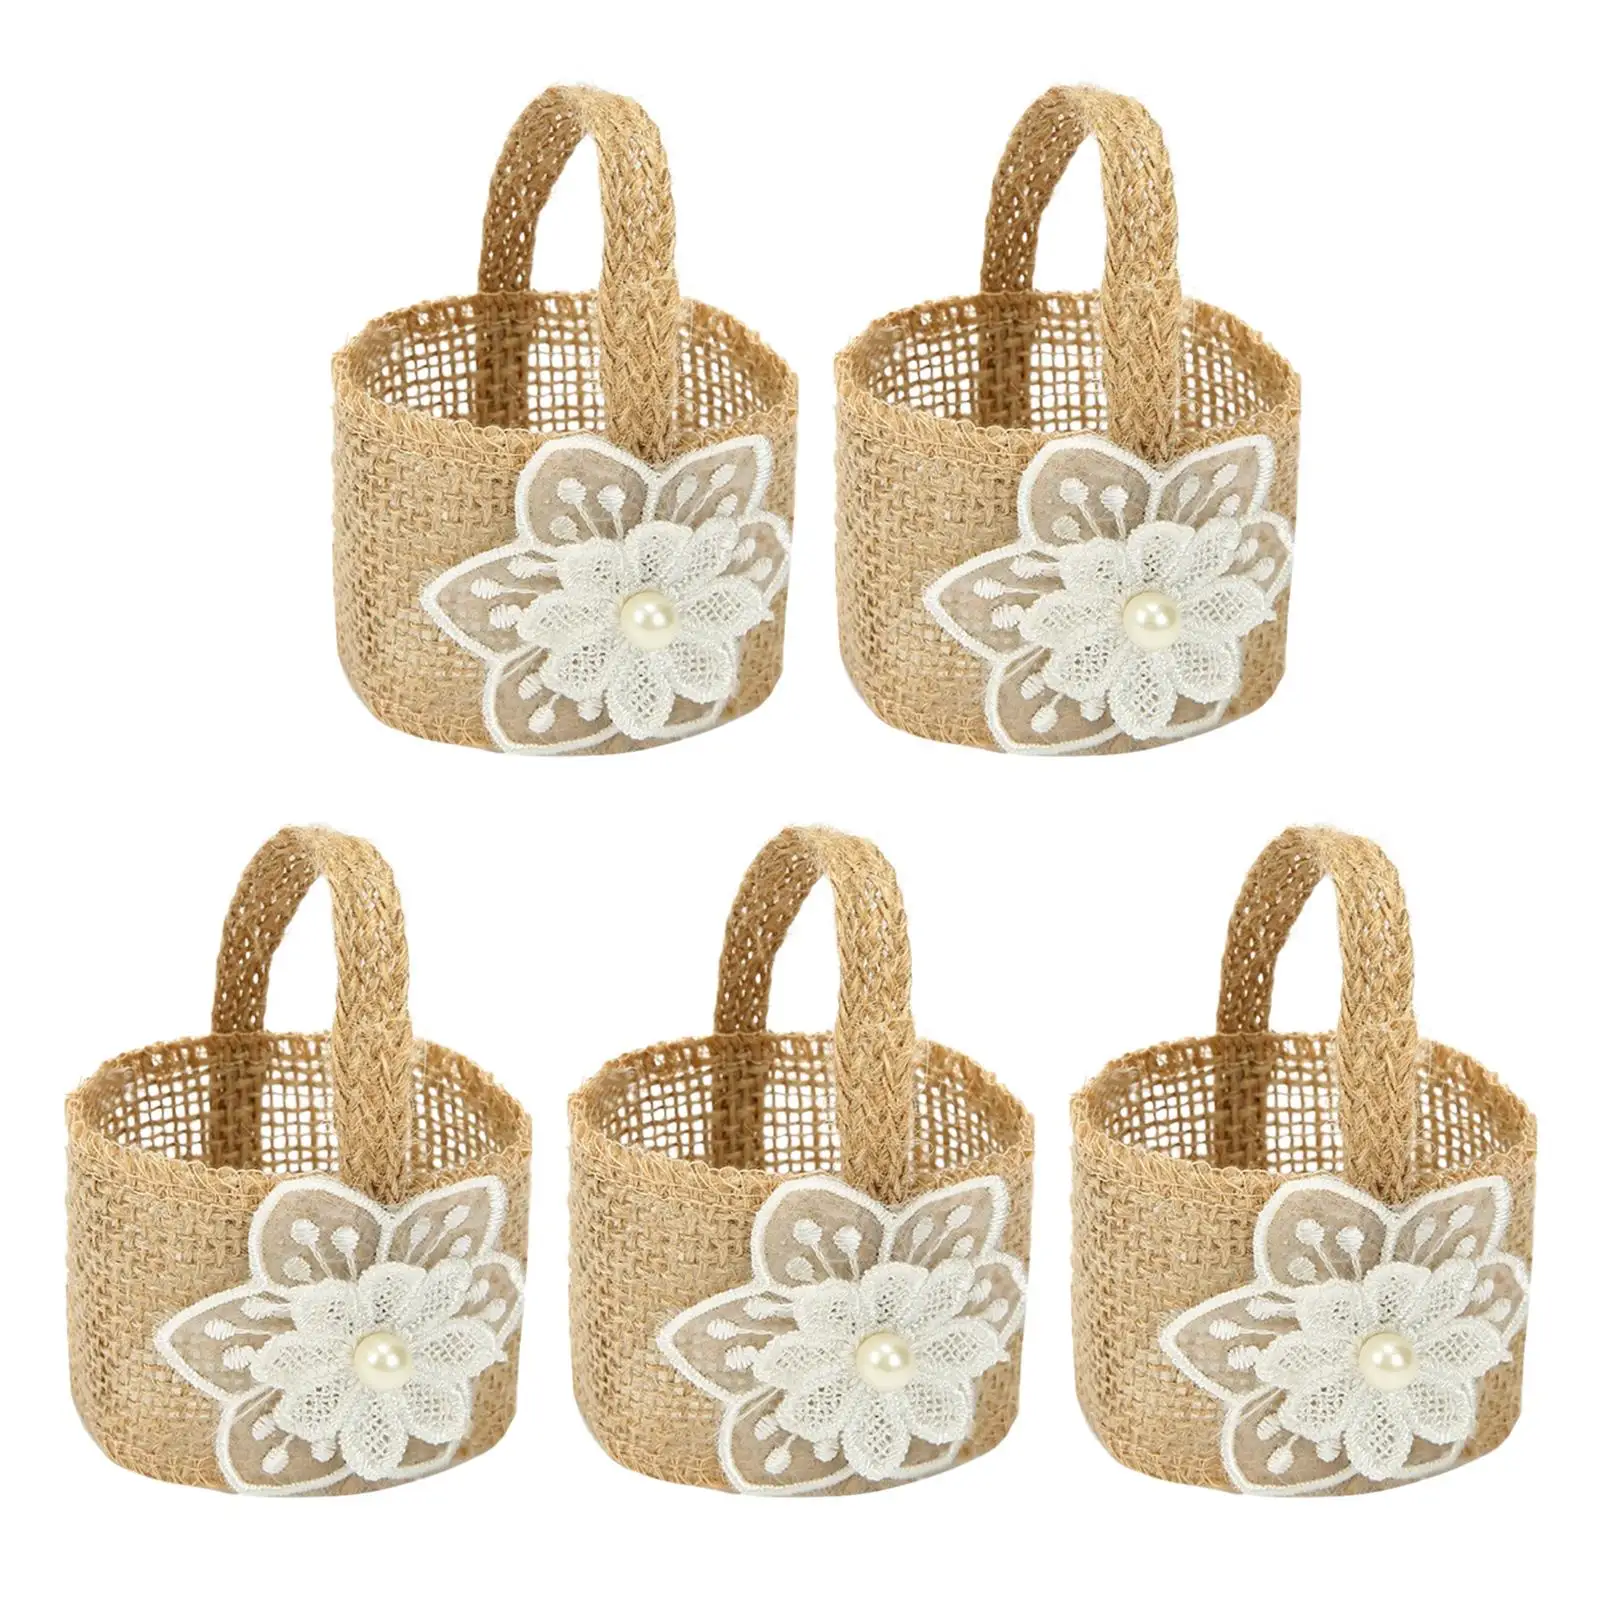 5x Halloween Trick or Treat Bag Rustic Flower Baskets Wedding Flower Girl Baskets for Wedding Holiday Party Ceremony Halloween